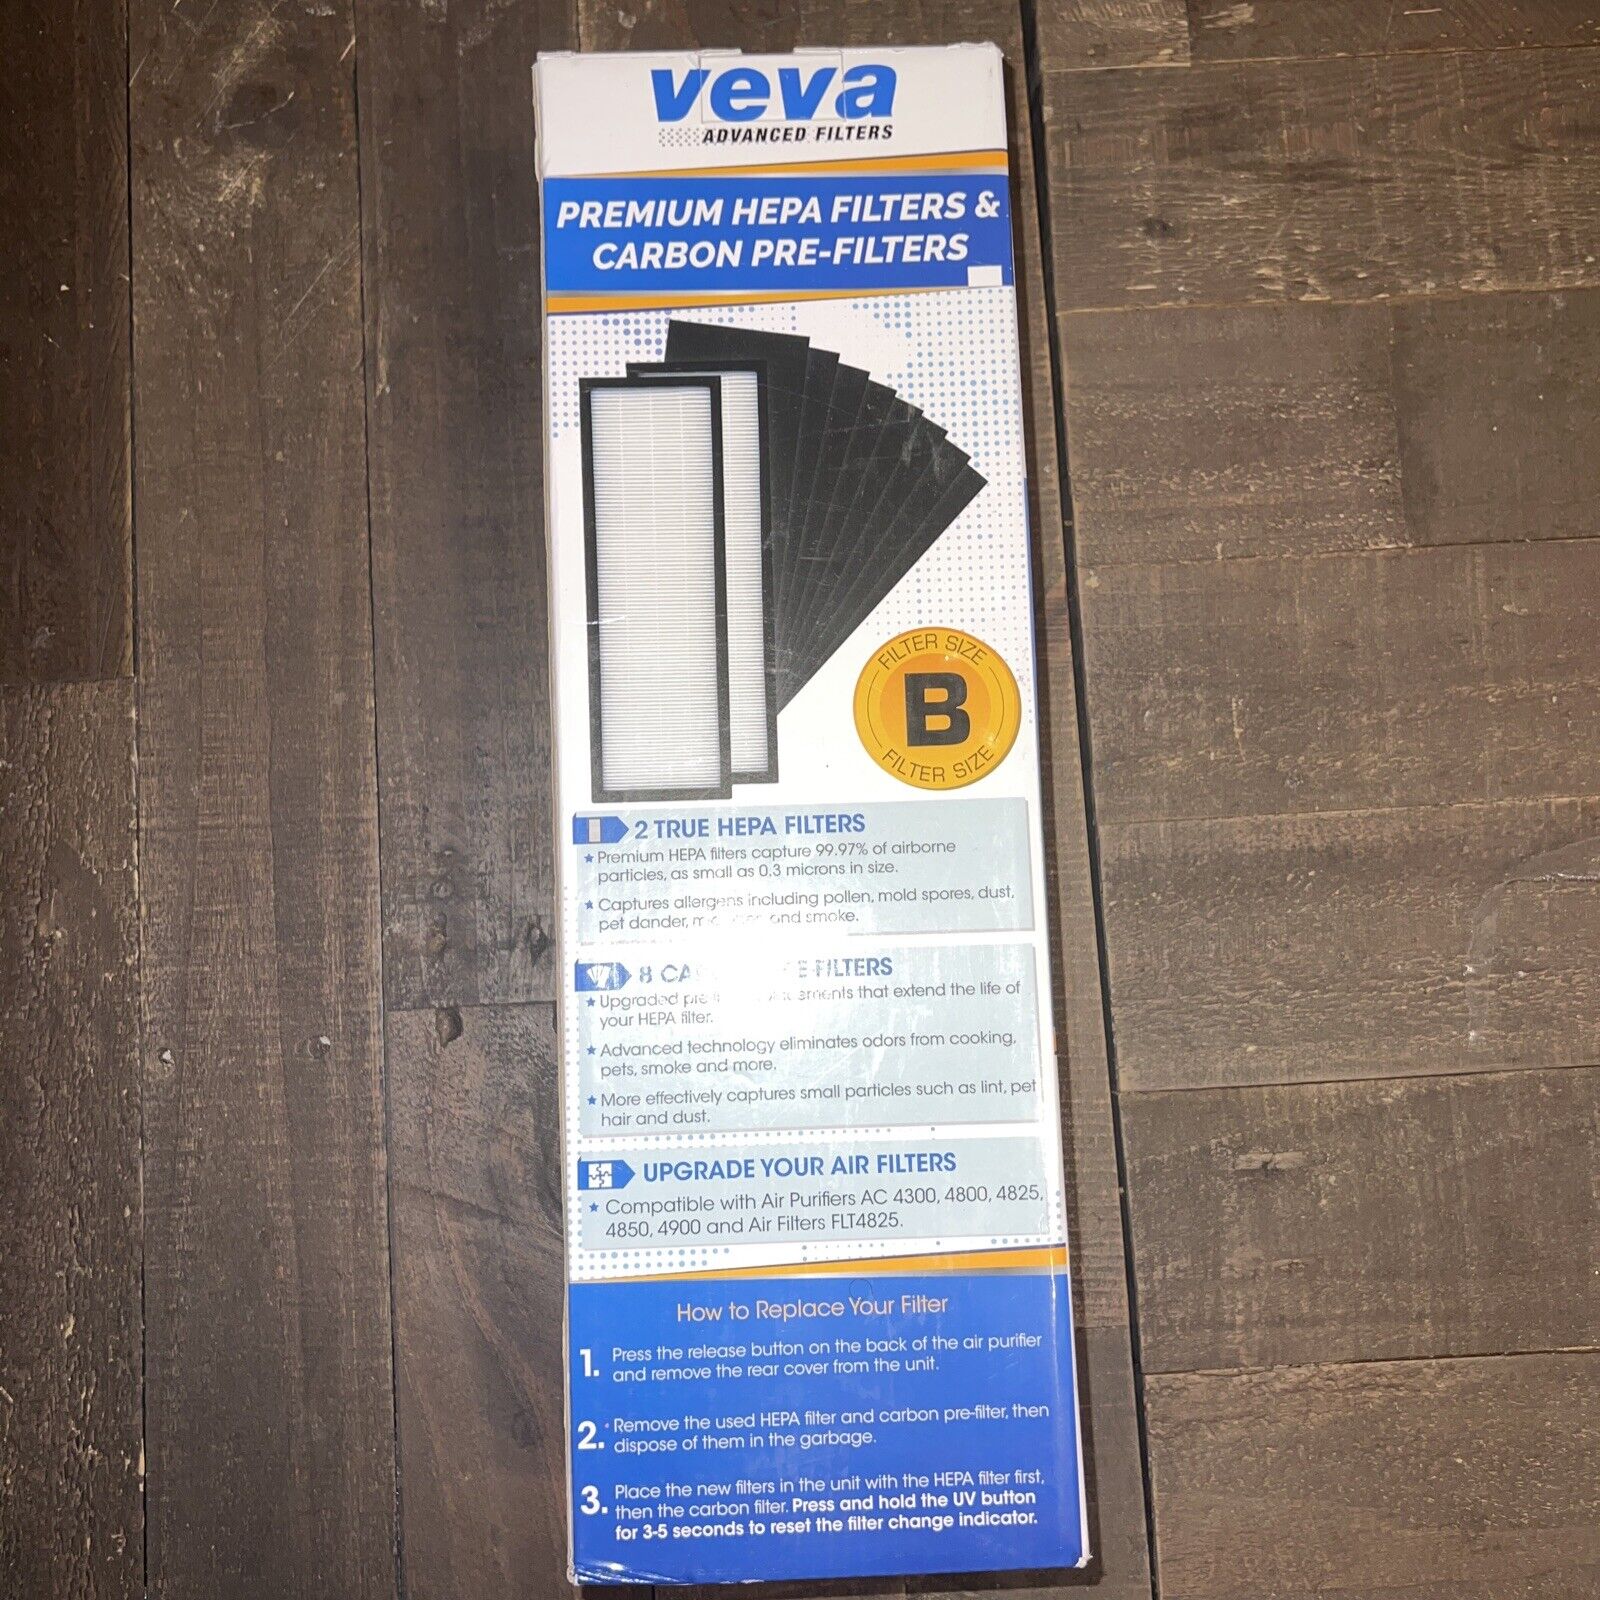 Veva Advanced Filter Size B 2 Hepa Filters and 8 Pre-Carbon Filters